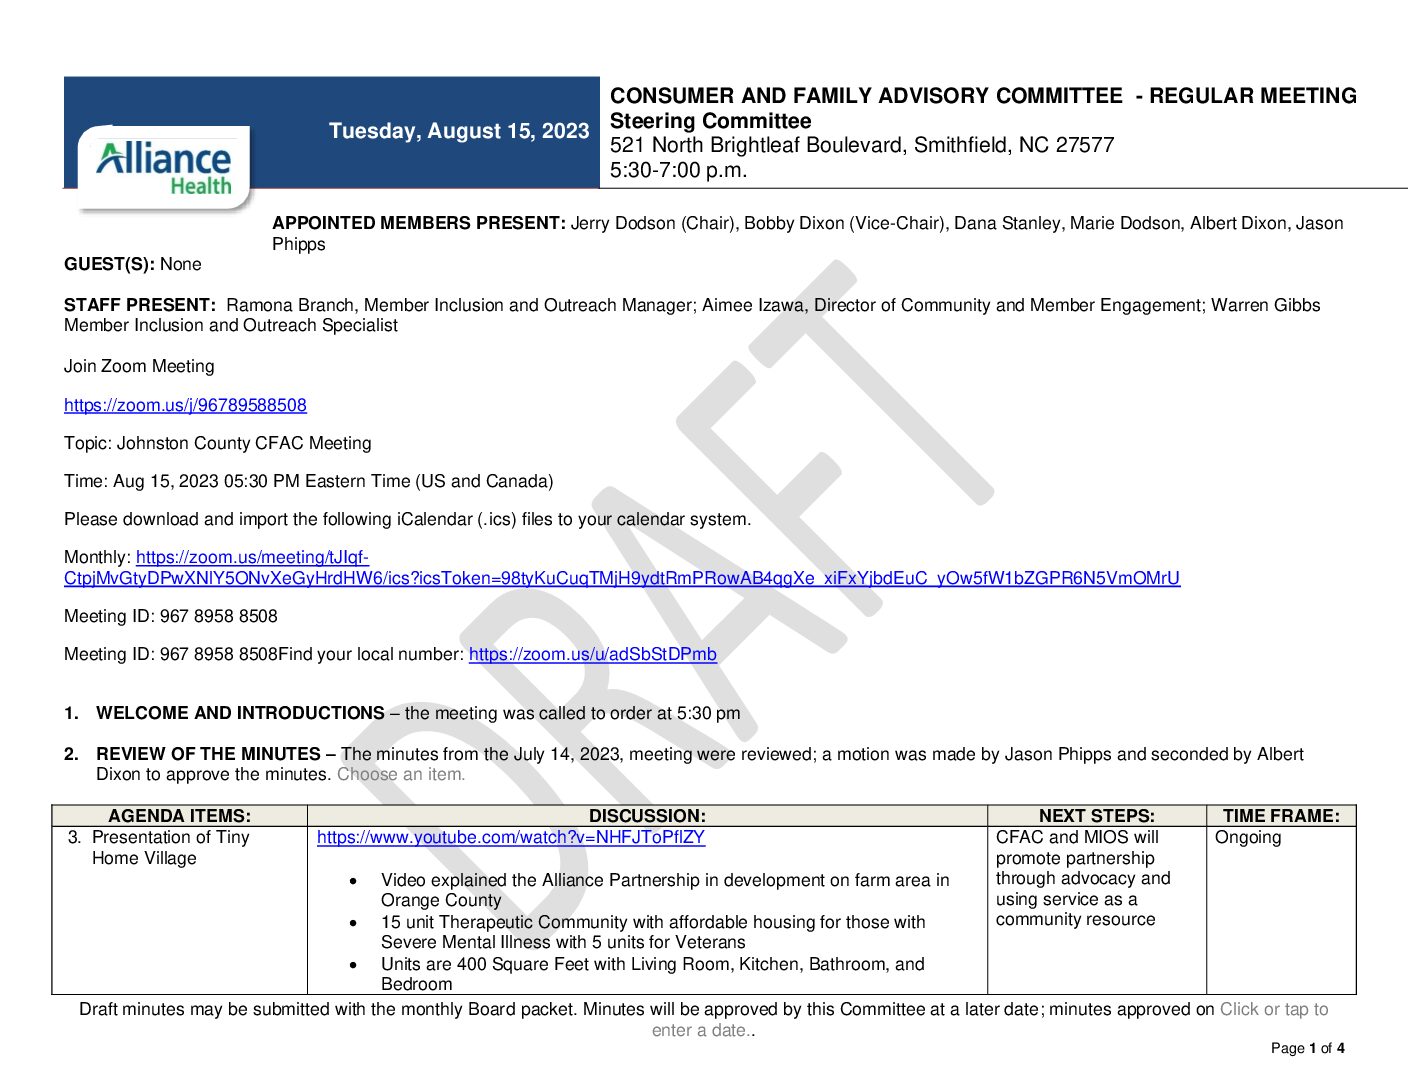 Johnston County CFAC Meeting Minutes August 2023